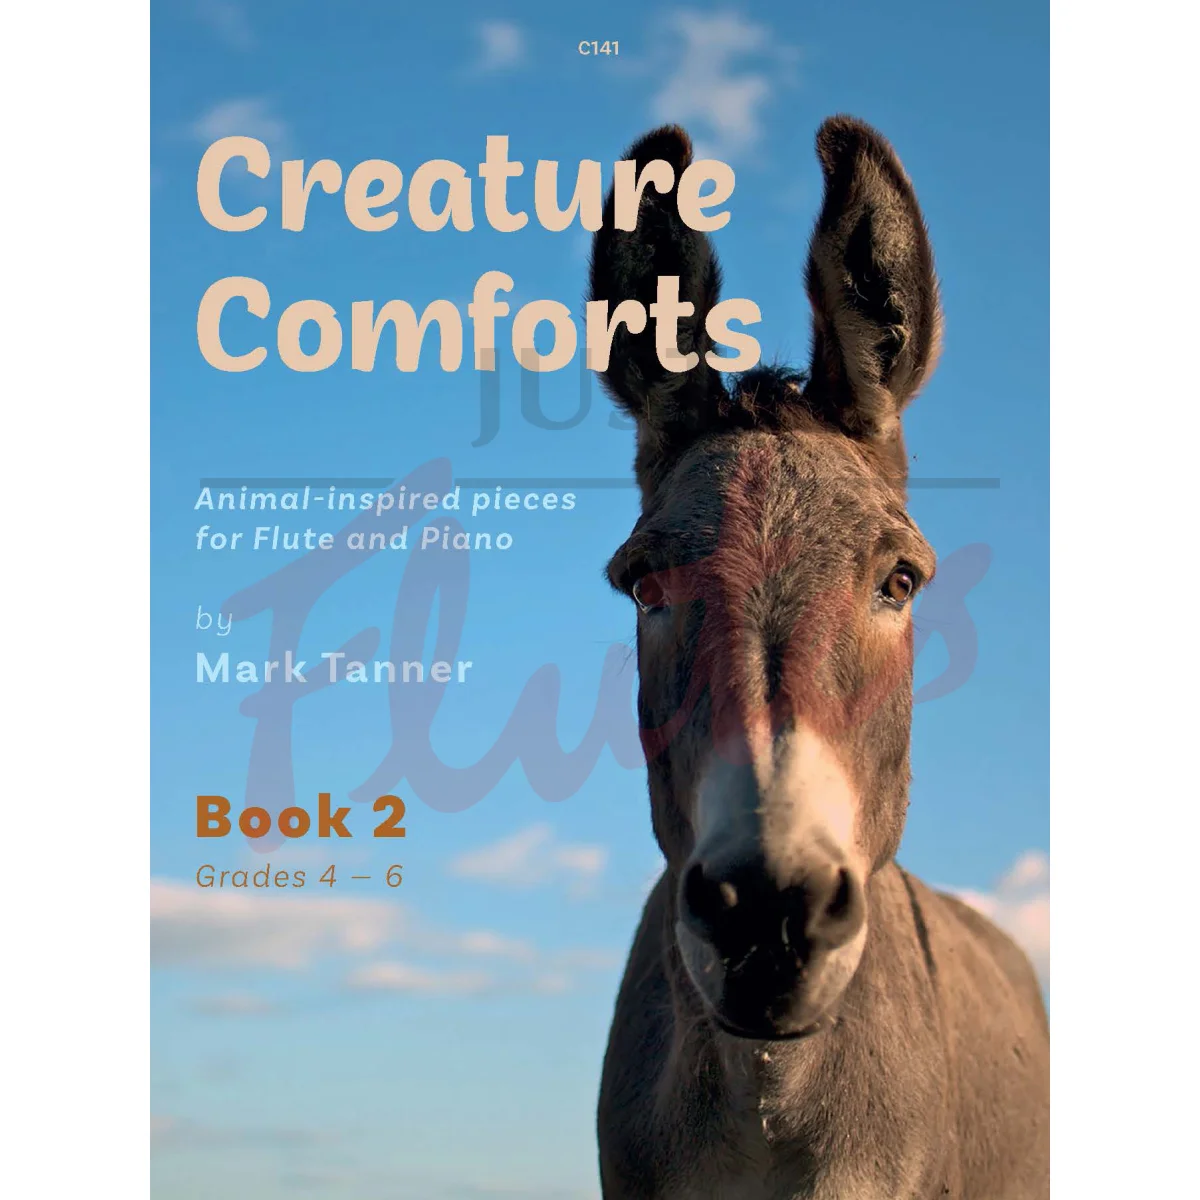 Creature Comforts for Flute and Piano, Book 2